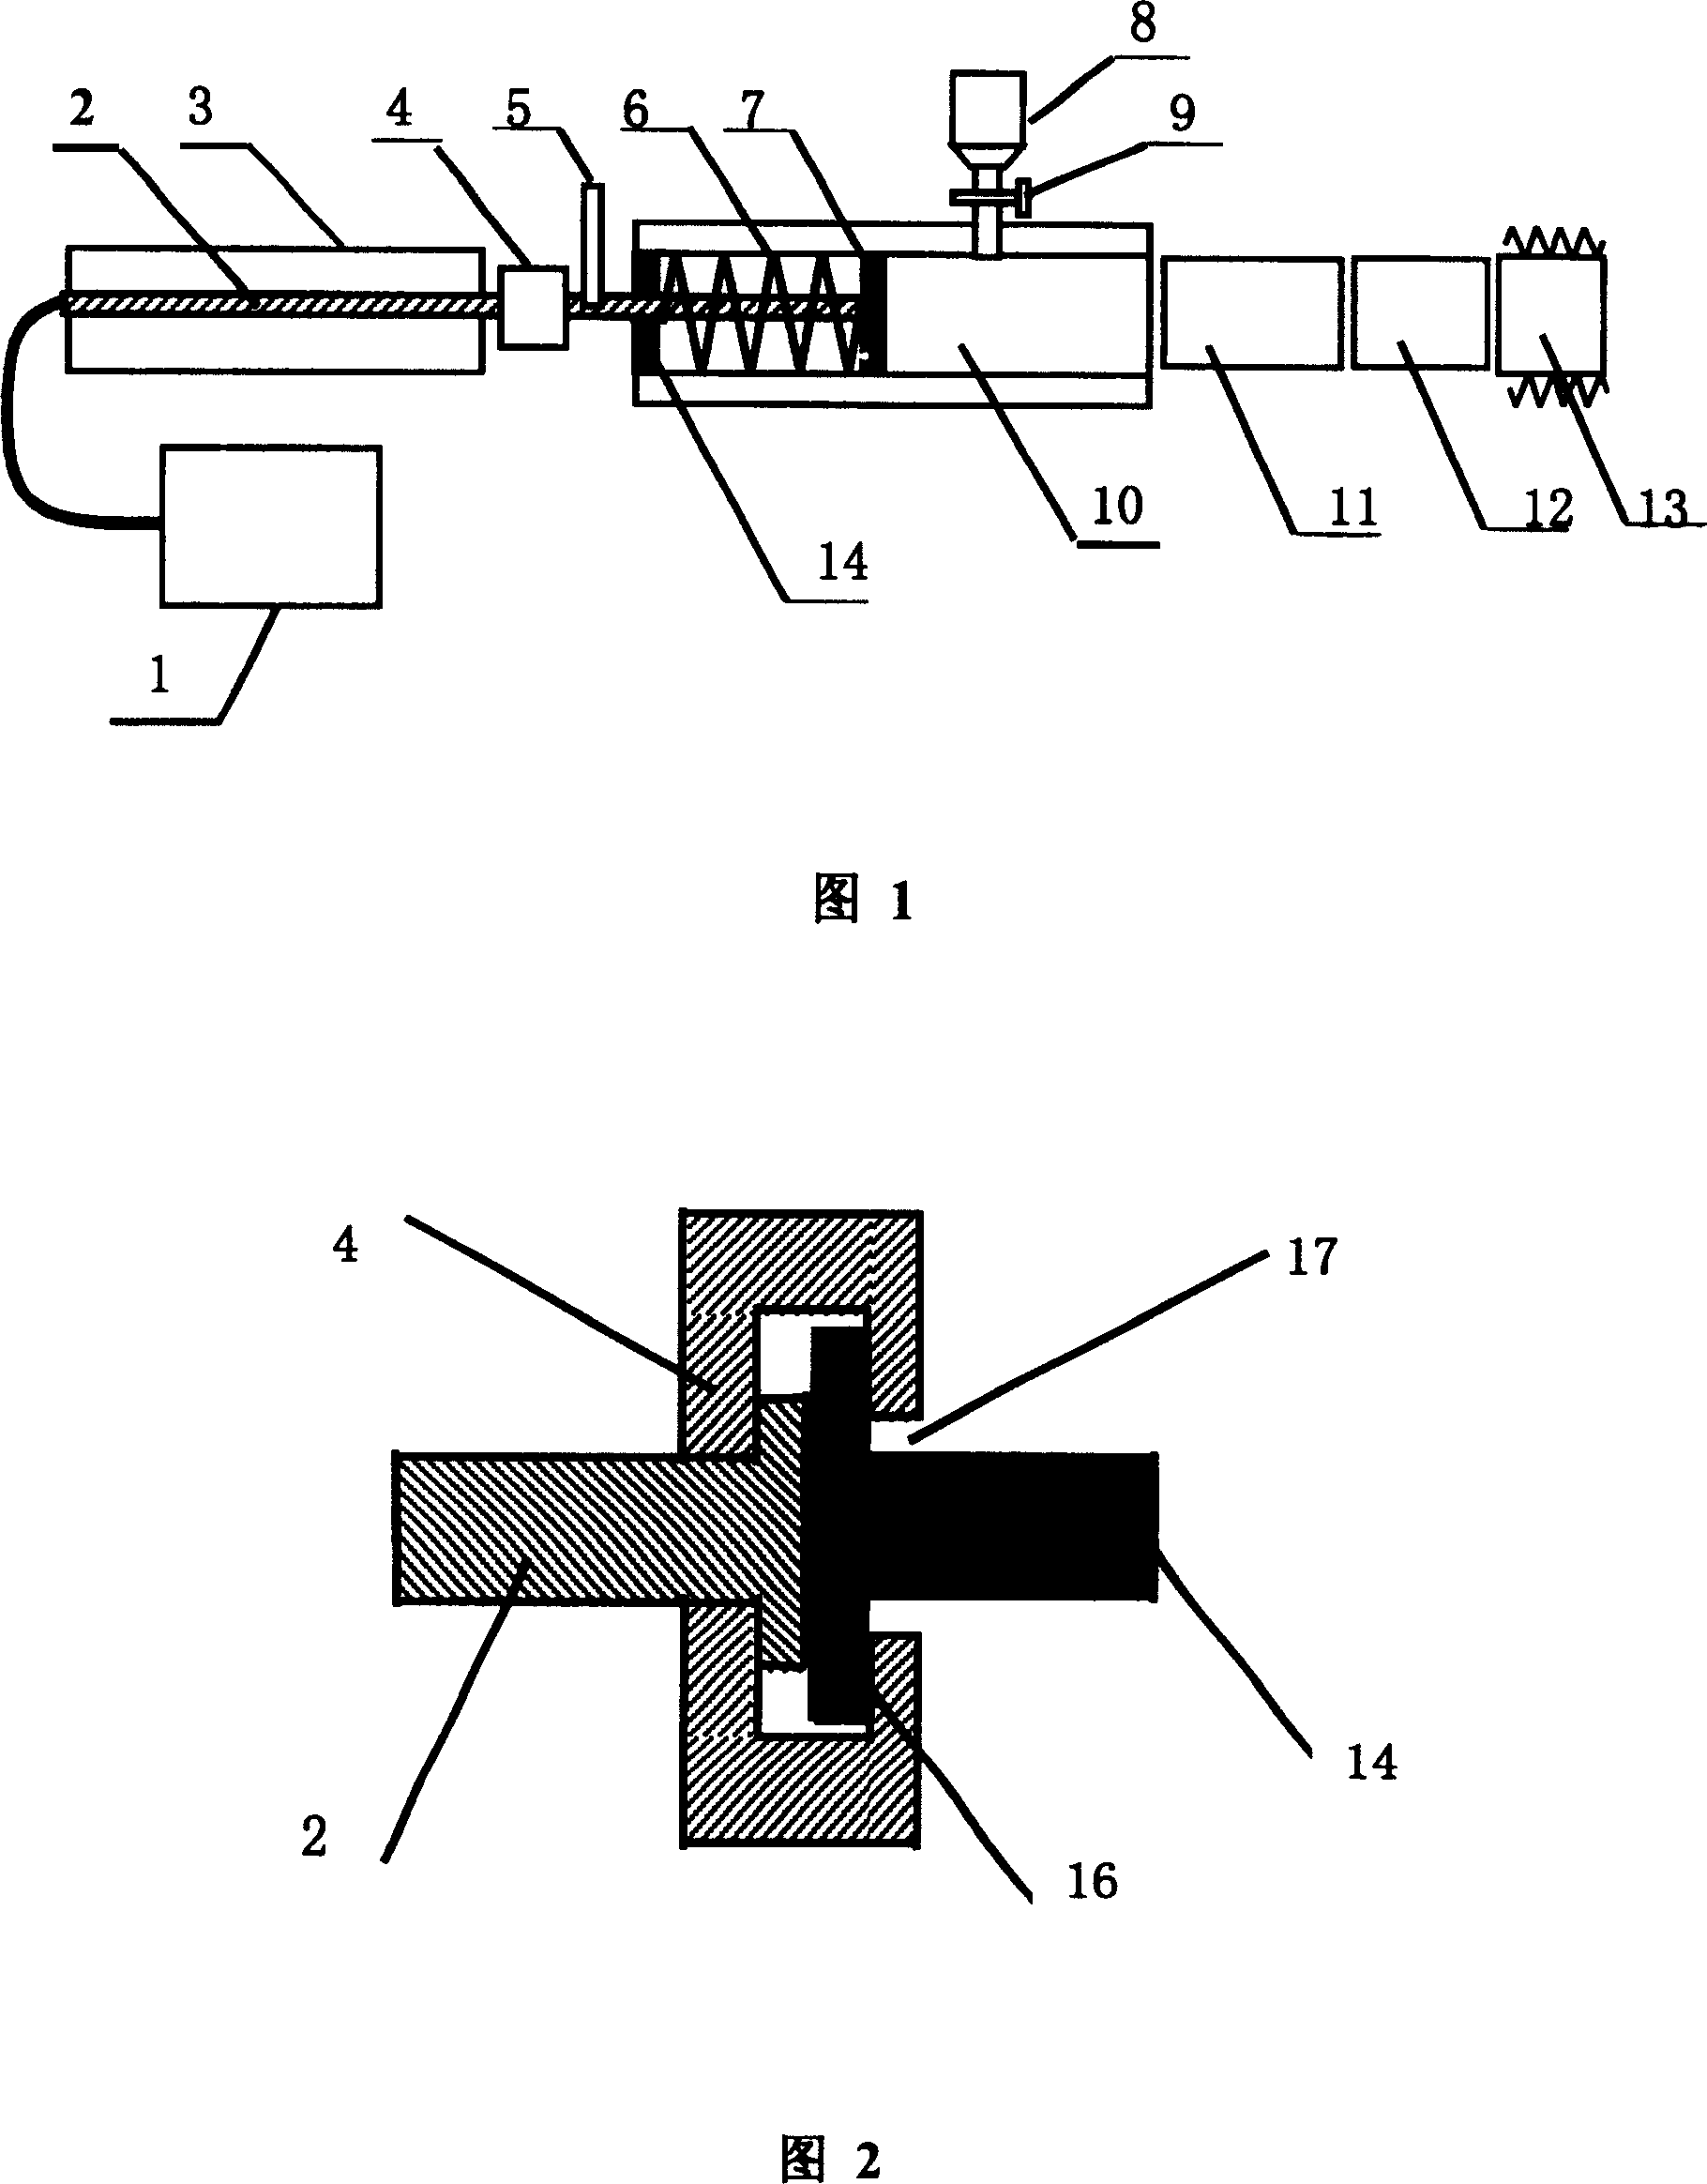 Tracing particle high-speed jettison device in waterflow field particle imaging velocity measuring system